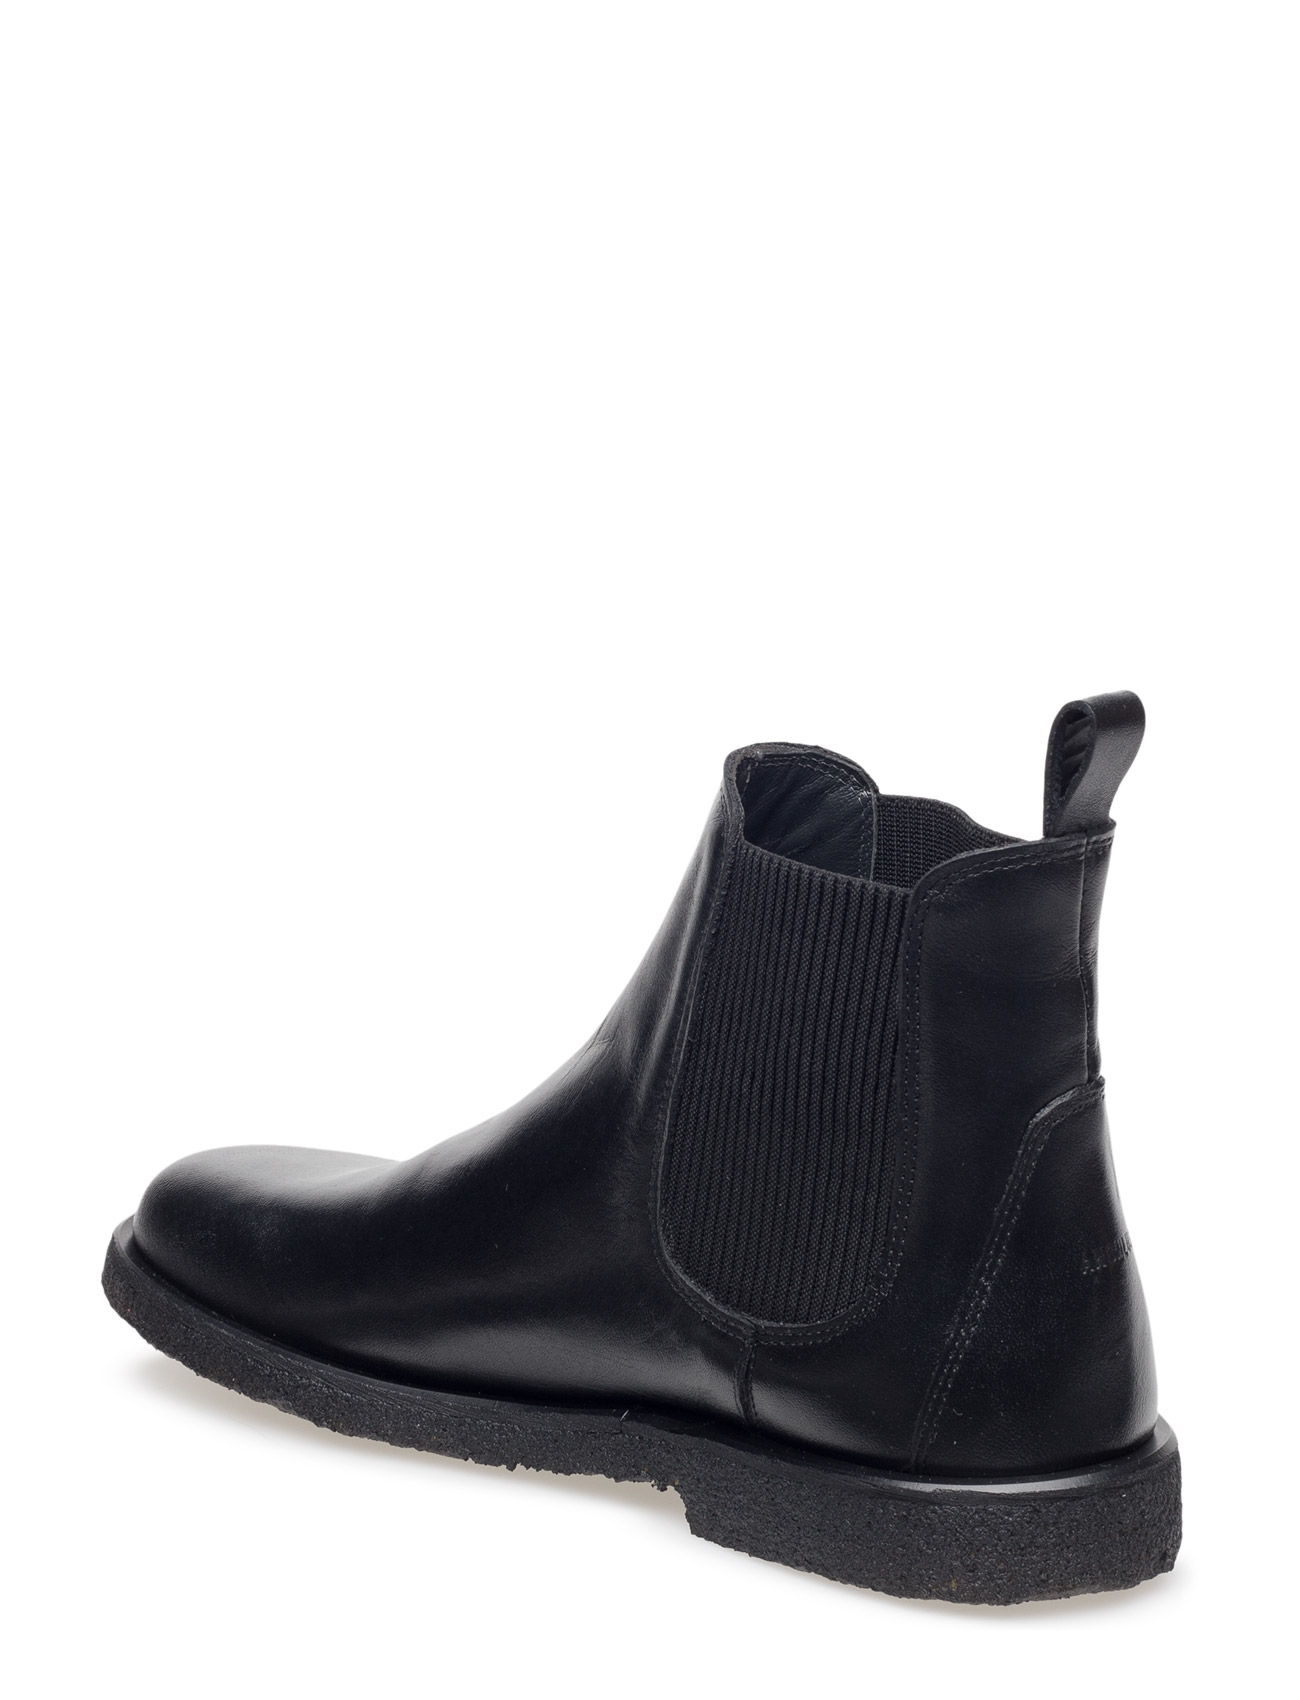 Booties-Flat - With Elastic Shoes Chelsea Boots Musta ANGULUS